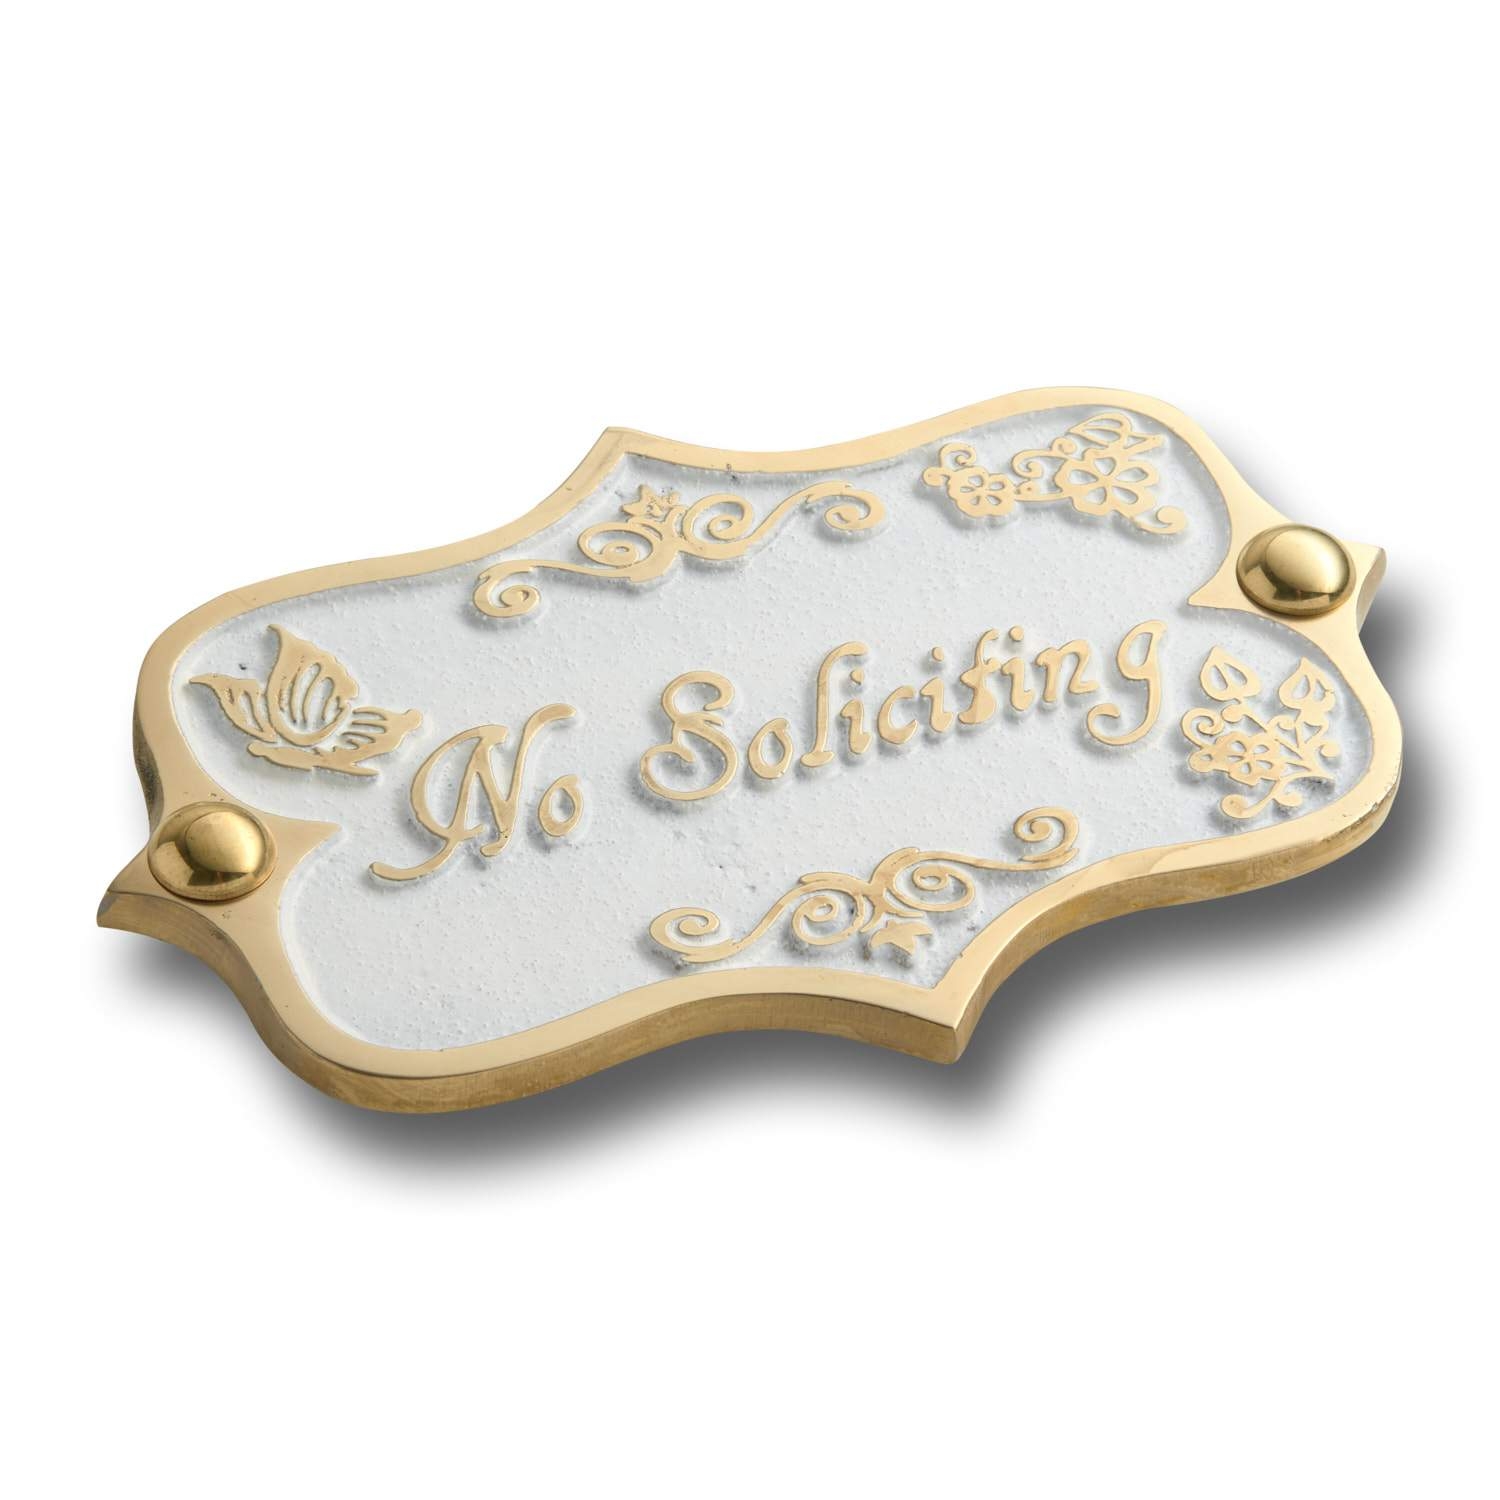 No Soliciting Brass Door Sign.  Vintage Shabby Chic Style Home Décor Wall Plaque